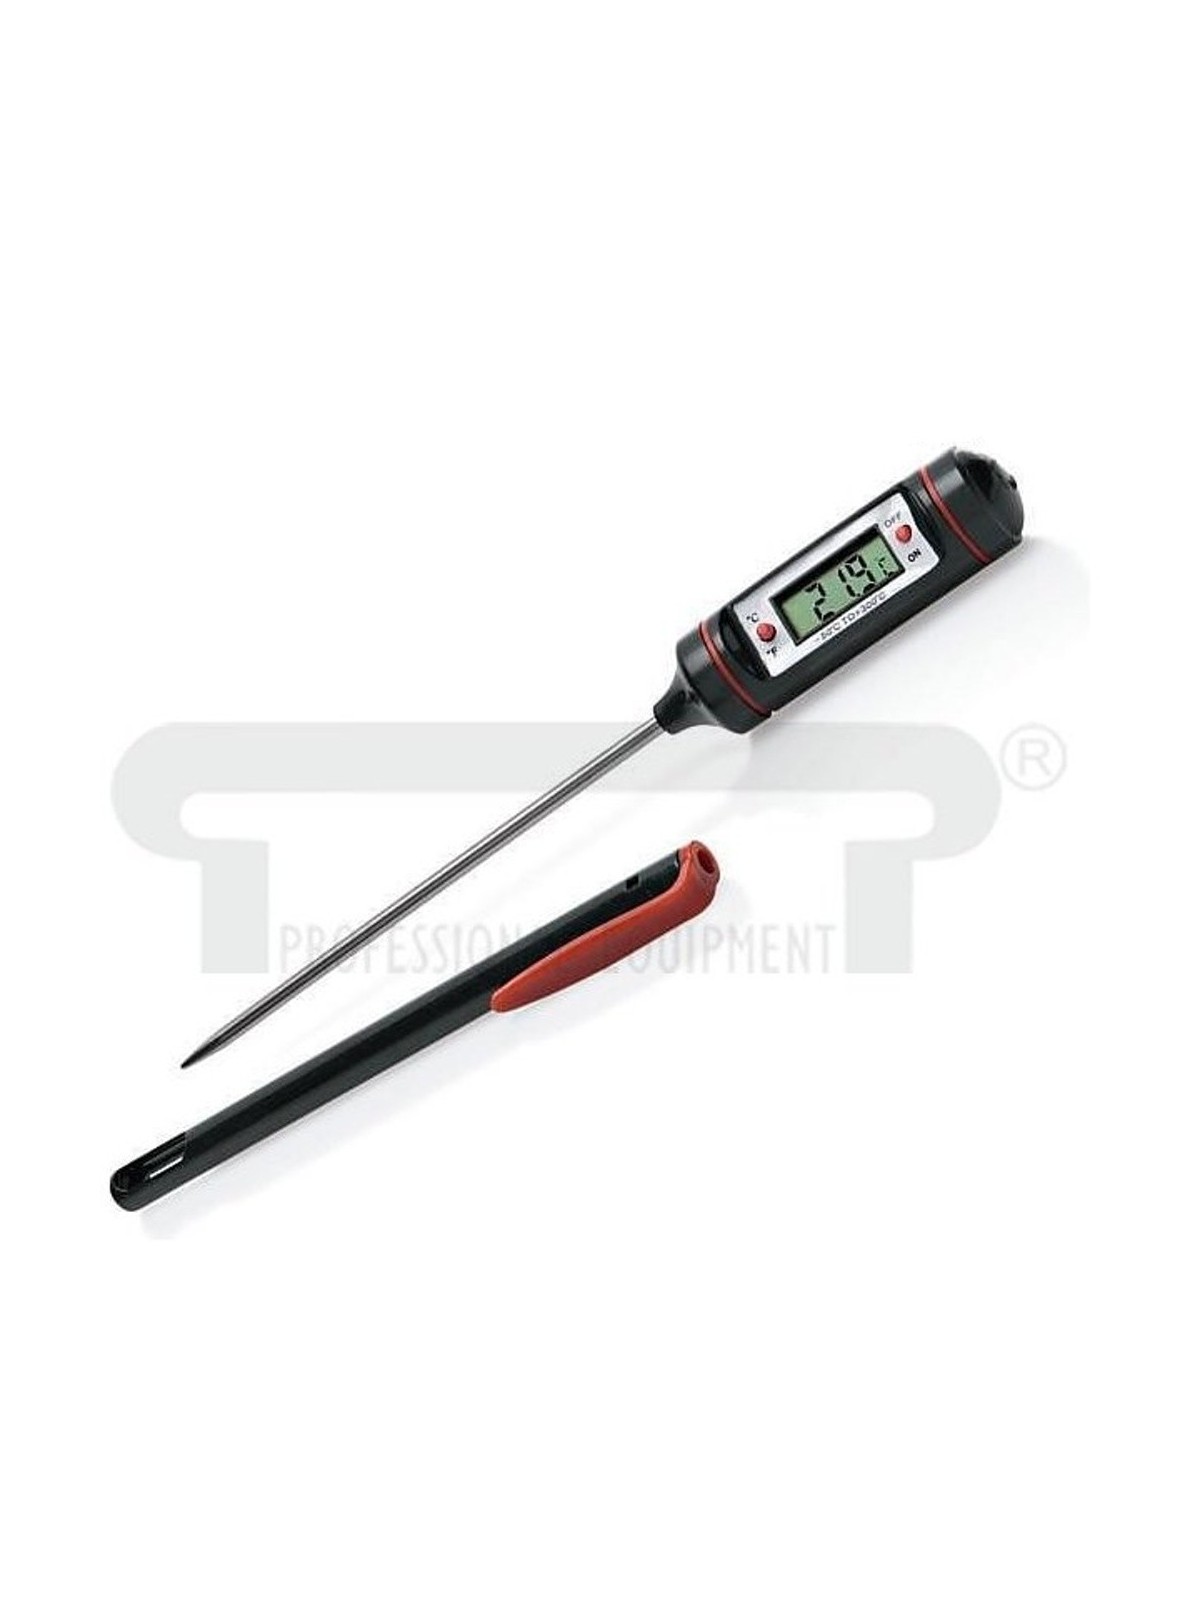 Digital thermometer for cooking